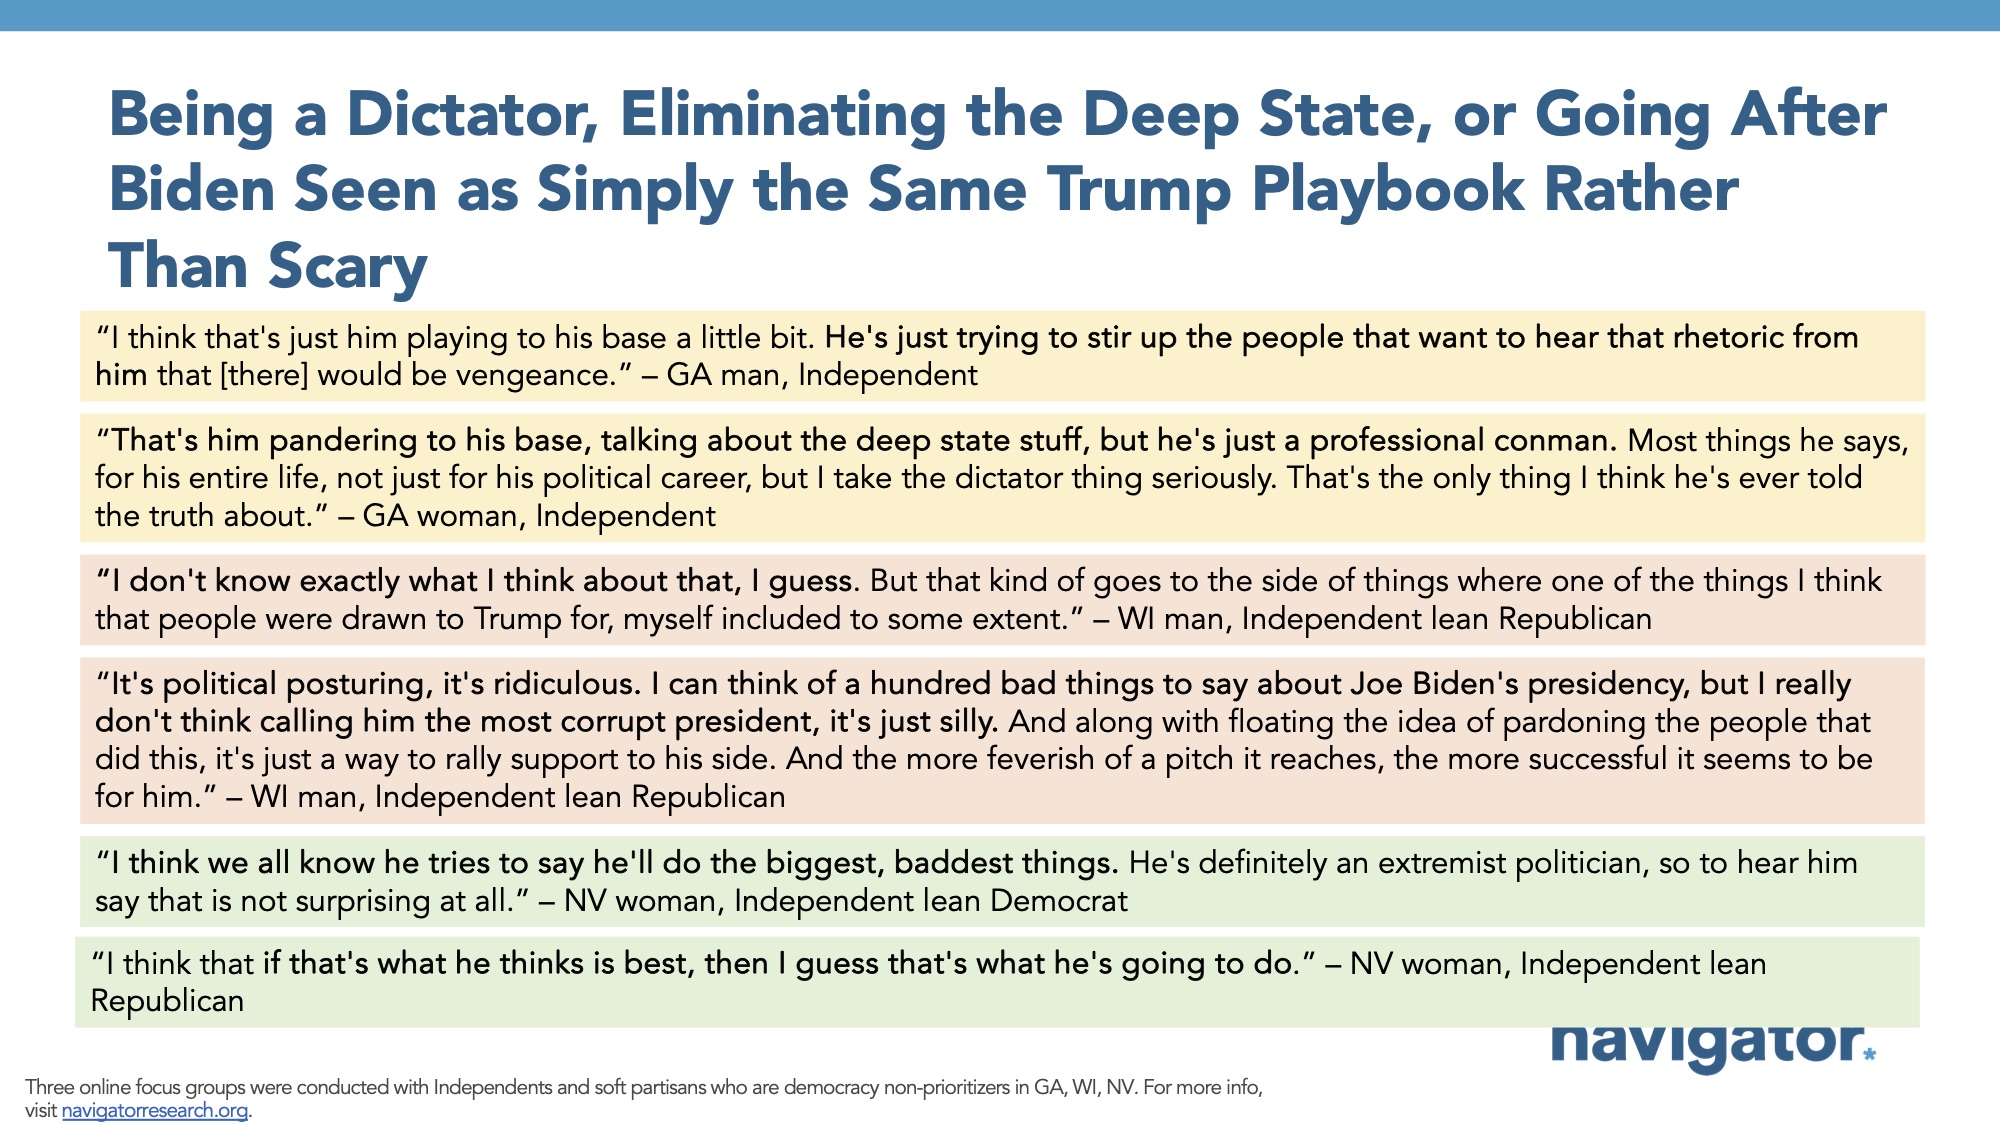 Focus group report slide titled: Being a Dictator, Eliminating the Deep State, or Going After Biden Seen as Simply the Same Trump Playbook Rather Than Scary